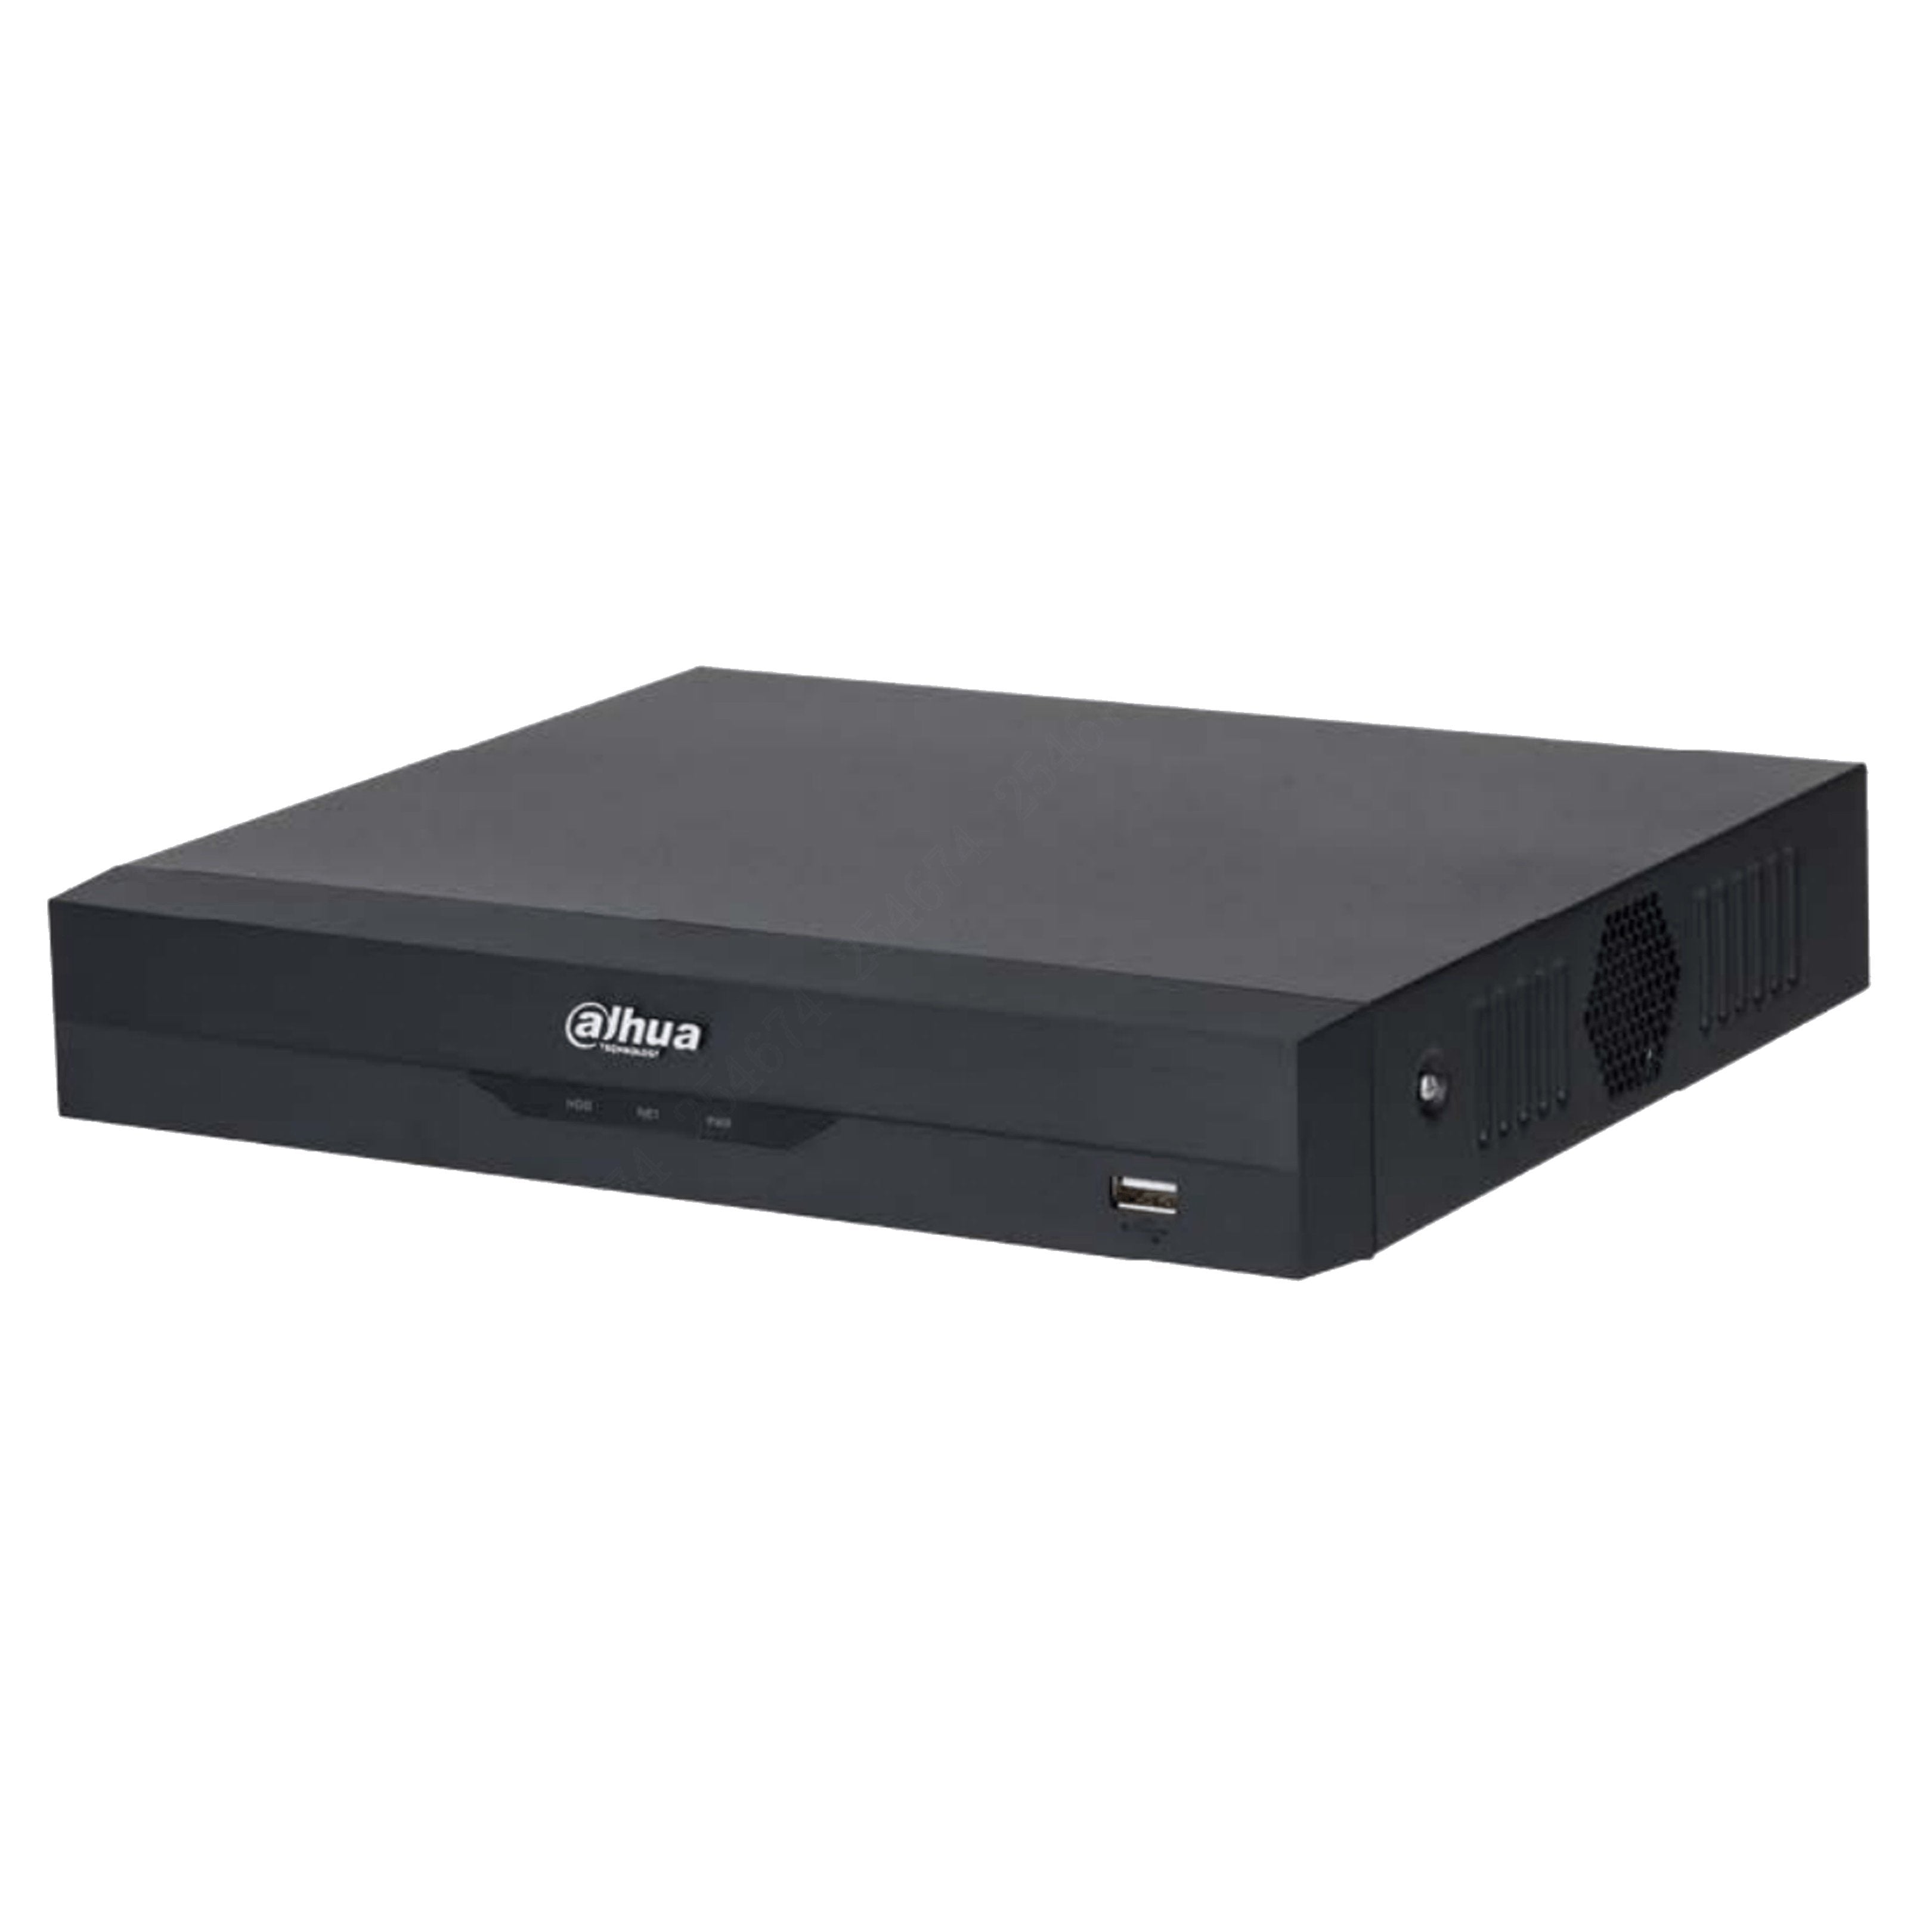 Dahua 4 Channel WizSense AI Series Penta-Brid 4K 1RU XVR, H.265+, Supports HDCVI / AHD / TVI / CVBS / IP Video Inputs, Max 8CH IP Up To 8MP, Max 64Mbps, SMD Plus, Face Recognition, Perimeter Arm/Disarm, 1 x HDD **NO HDD INSTALLED**